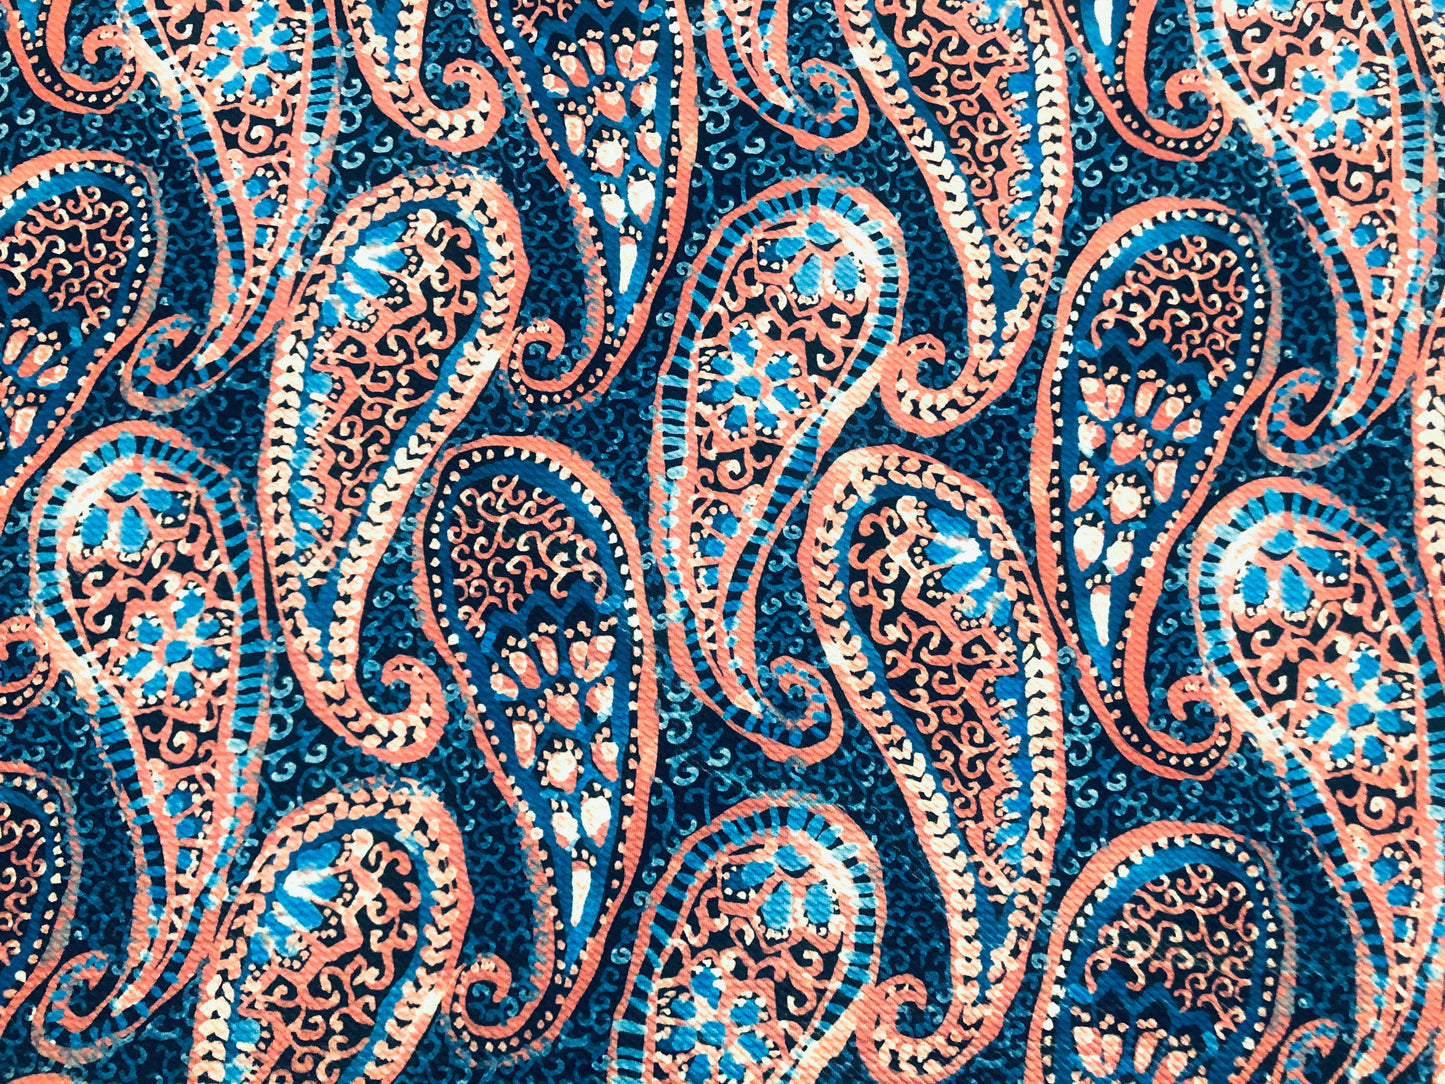 Bullet Knit Printed Fabric-Turquoise Pink Marble Paisleys-BPR235-Sold by the Yard